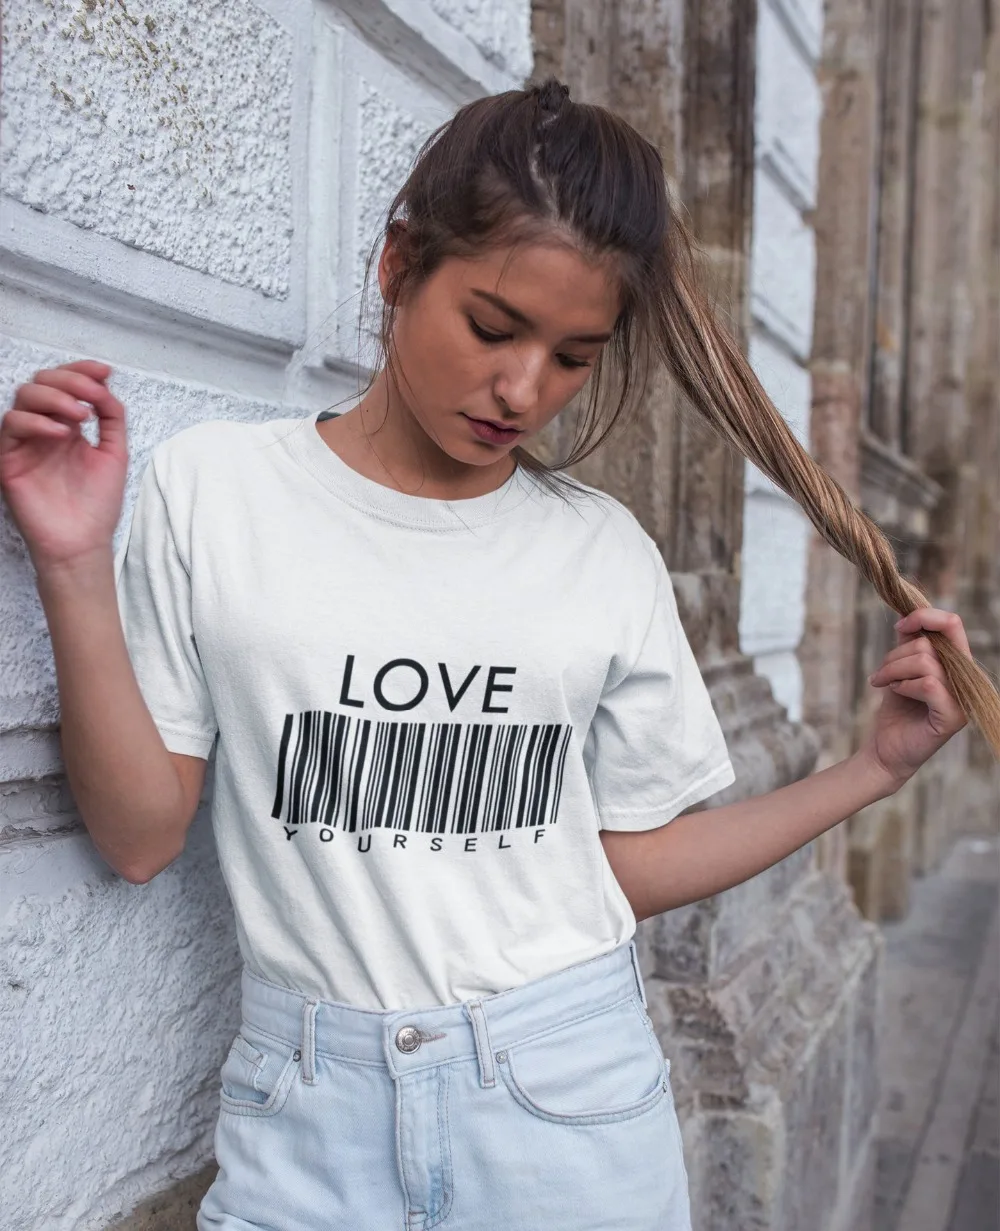 

T-shirt Woman Summer Graphic Bar Code Funny Unisex Grunge Aesthetic Tumblr Hipster Cool Girl Style Goth Tees Tops